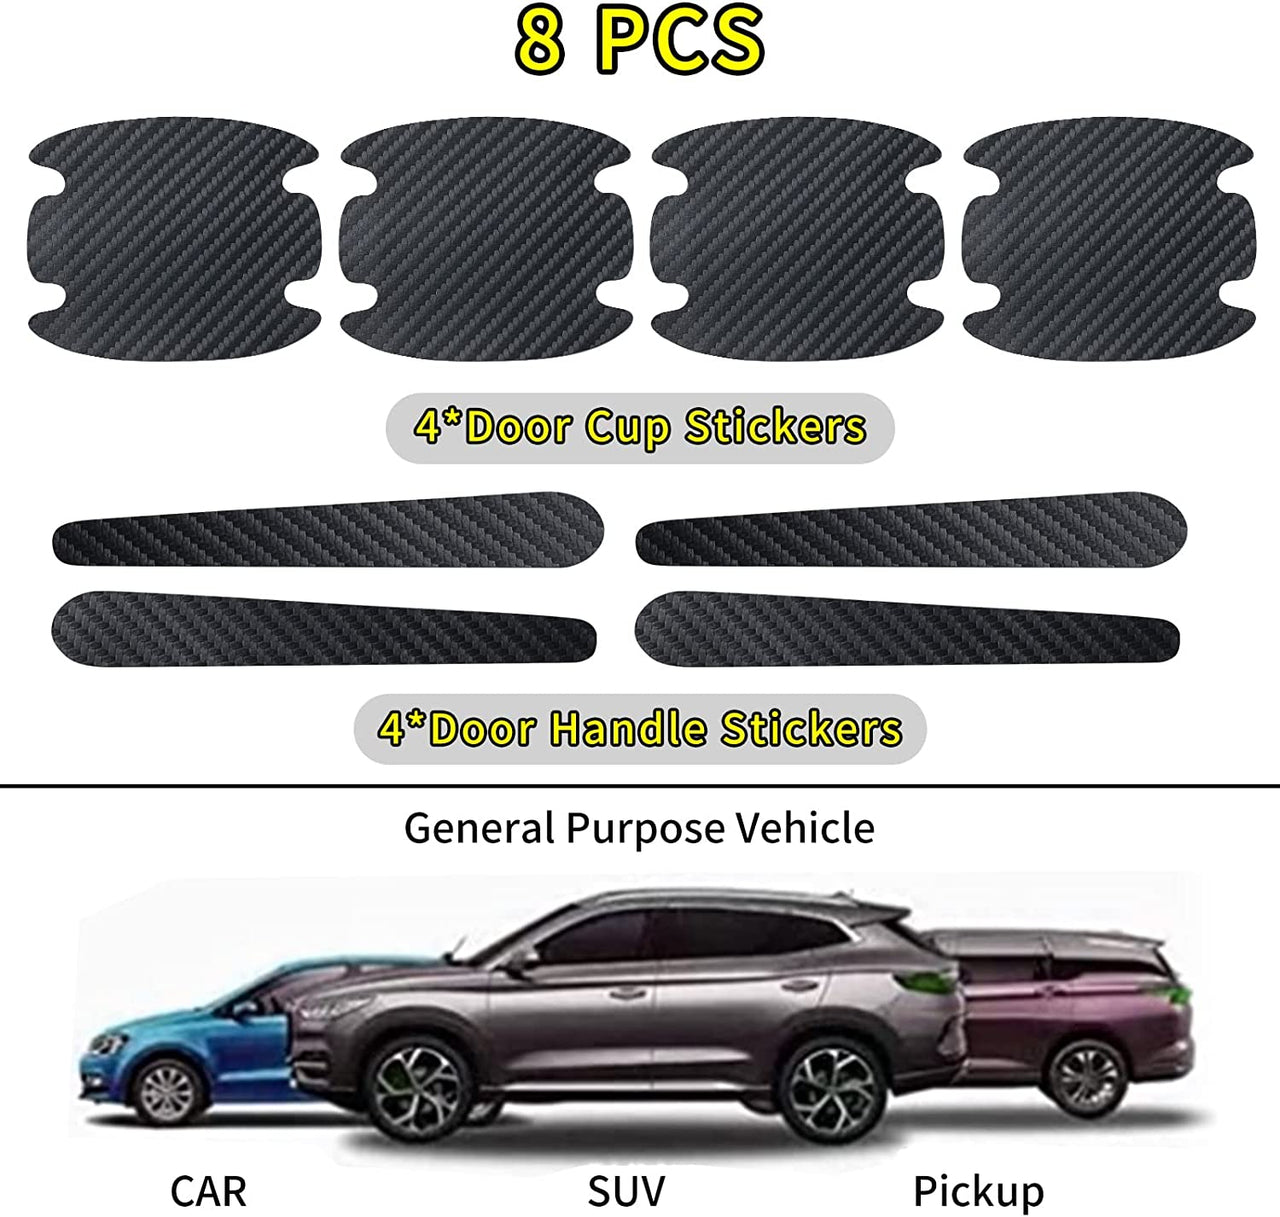 8 Pack Car Carbon Fiber Stickers Compatible with Car Cup Protectors Carbon Fiber Stickers Scratch Resistant Accessories